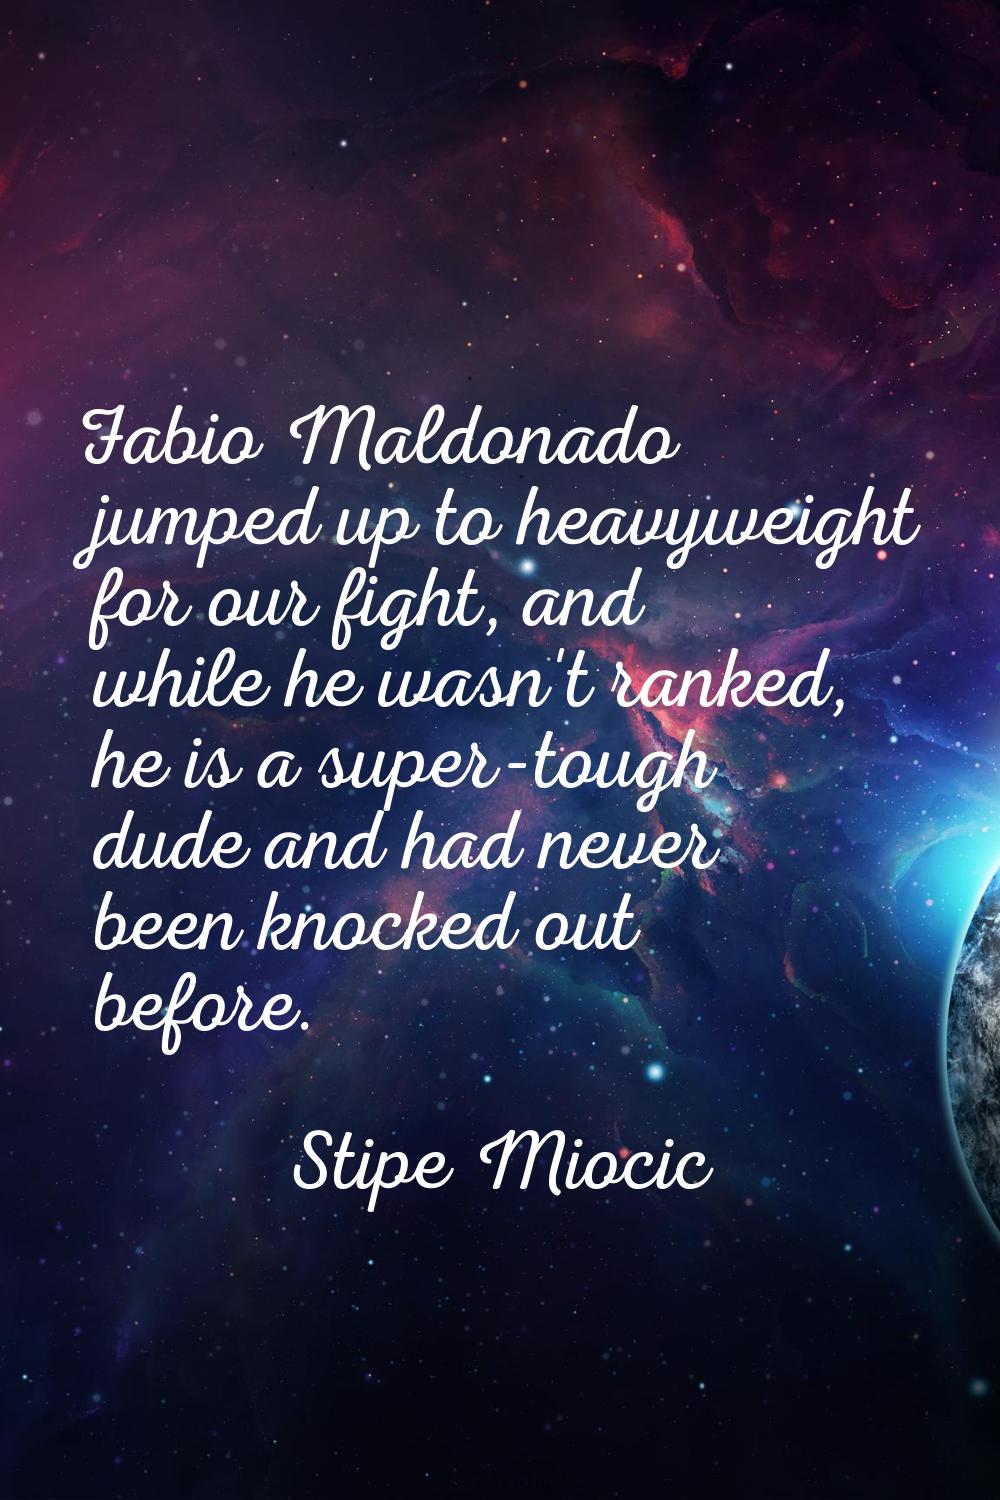 Fabio Maldonado jumped up to heavyweight for our fight, and while he wasn't ranked, he is a super-t